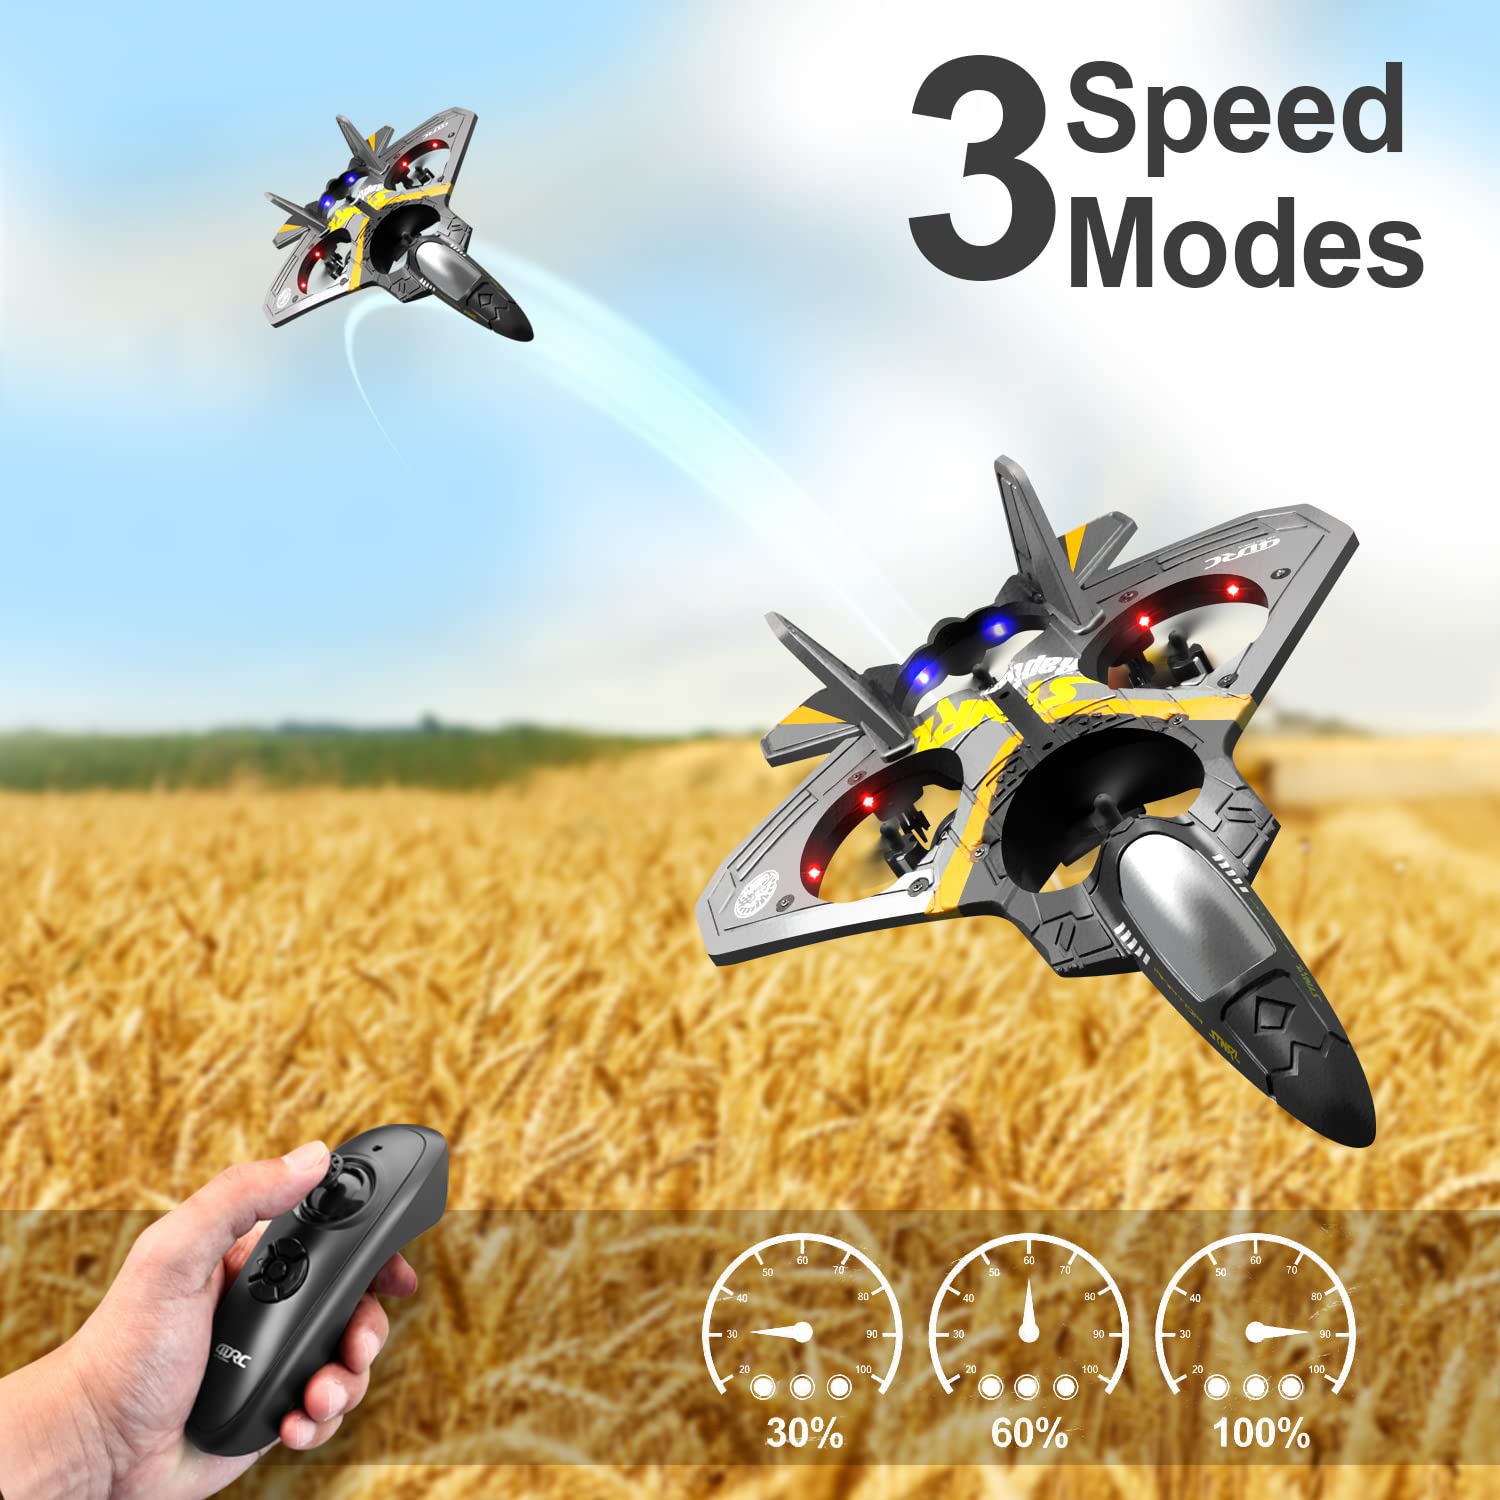 🎁Last Day Promotion- SAVE 70%🎁V17 Jet Fighter Stunt RC Airplane - FREE SHIPPING TODAY